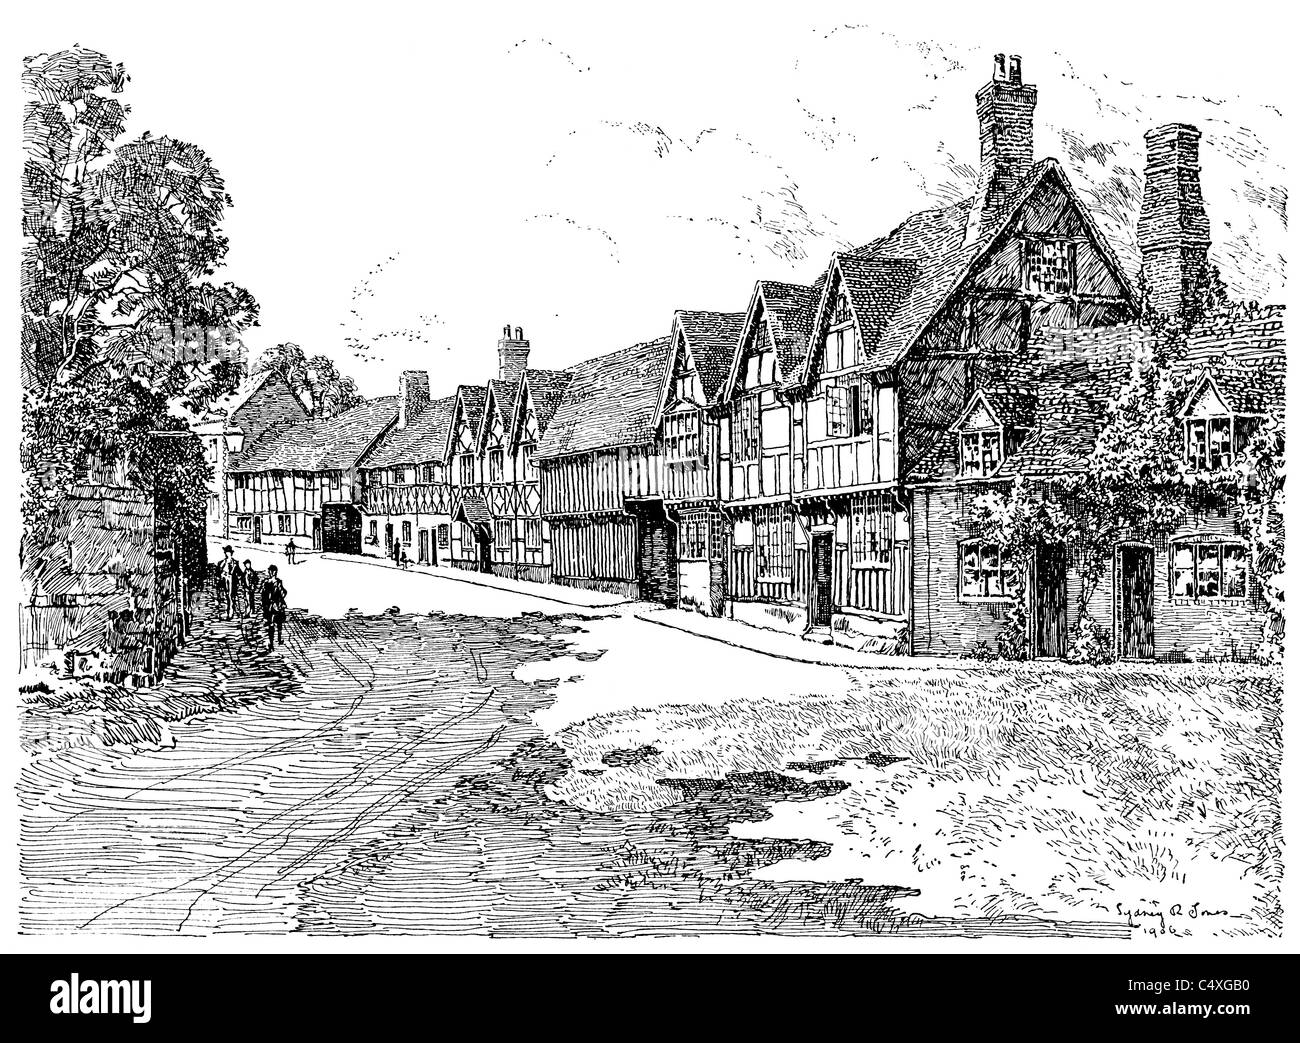 Mill Street, Warwick - pen and ink illustration from 'Old English Country Cottages' by Charles Holme, 1906. Stock Photo